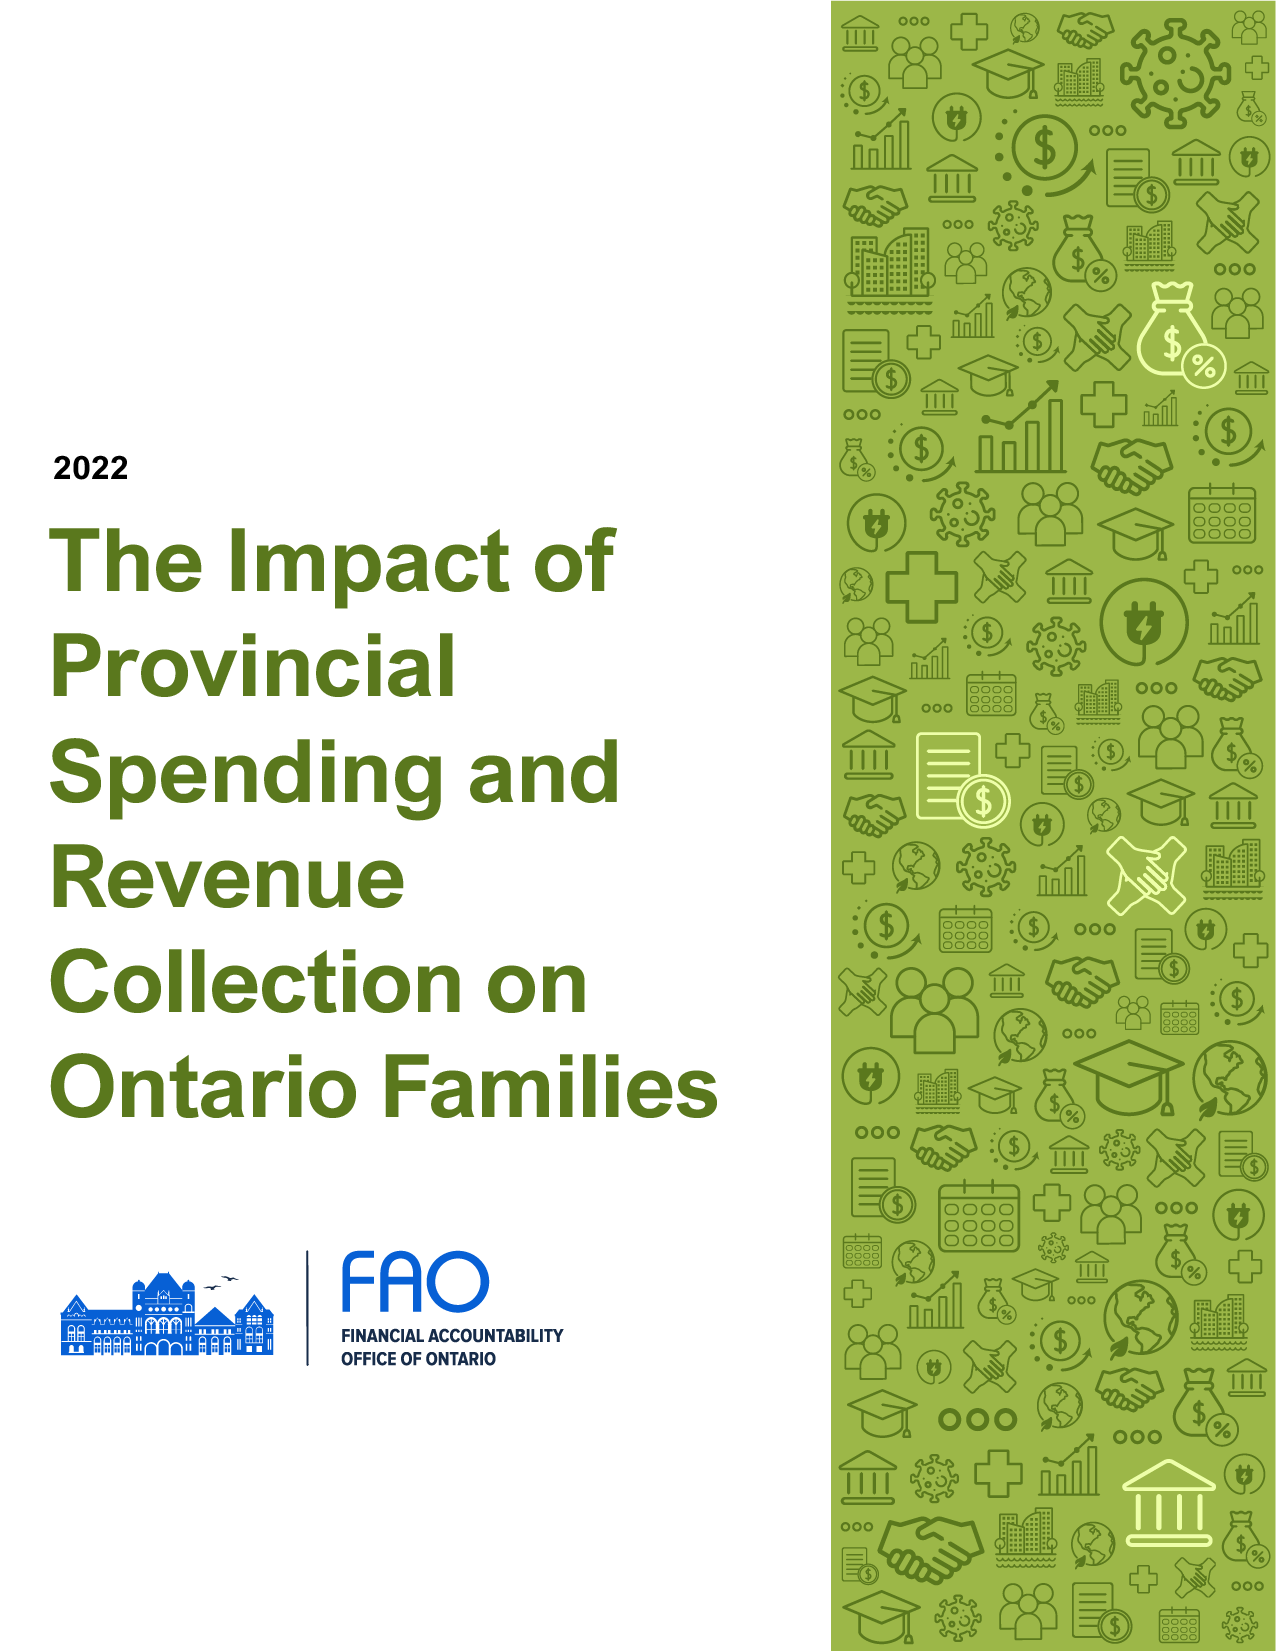 The Impact of Provincial Spending and Revenue Collection on Ontario Families report cover